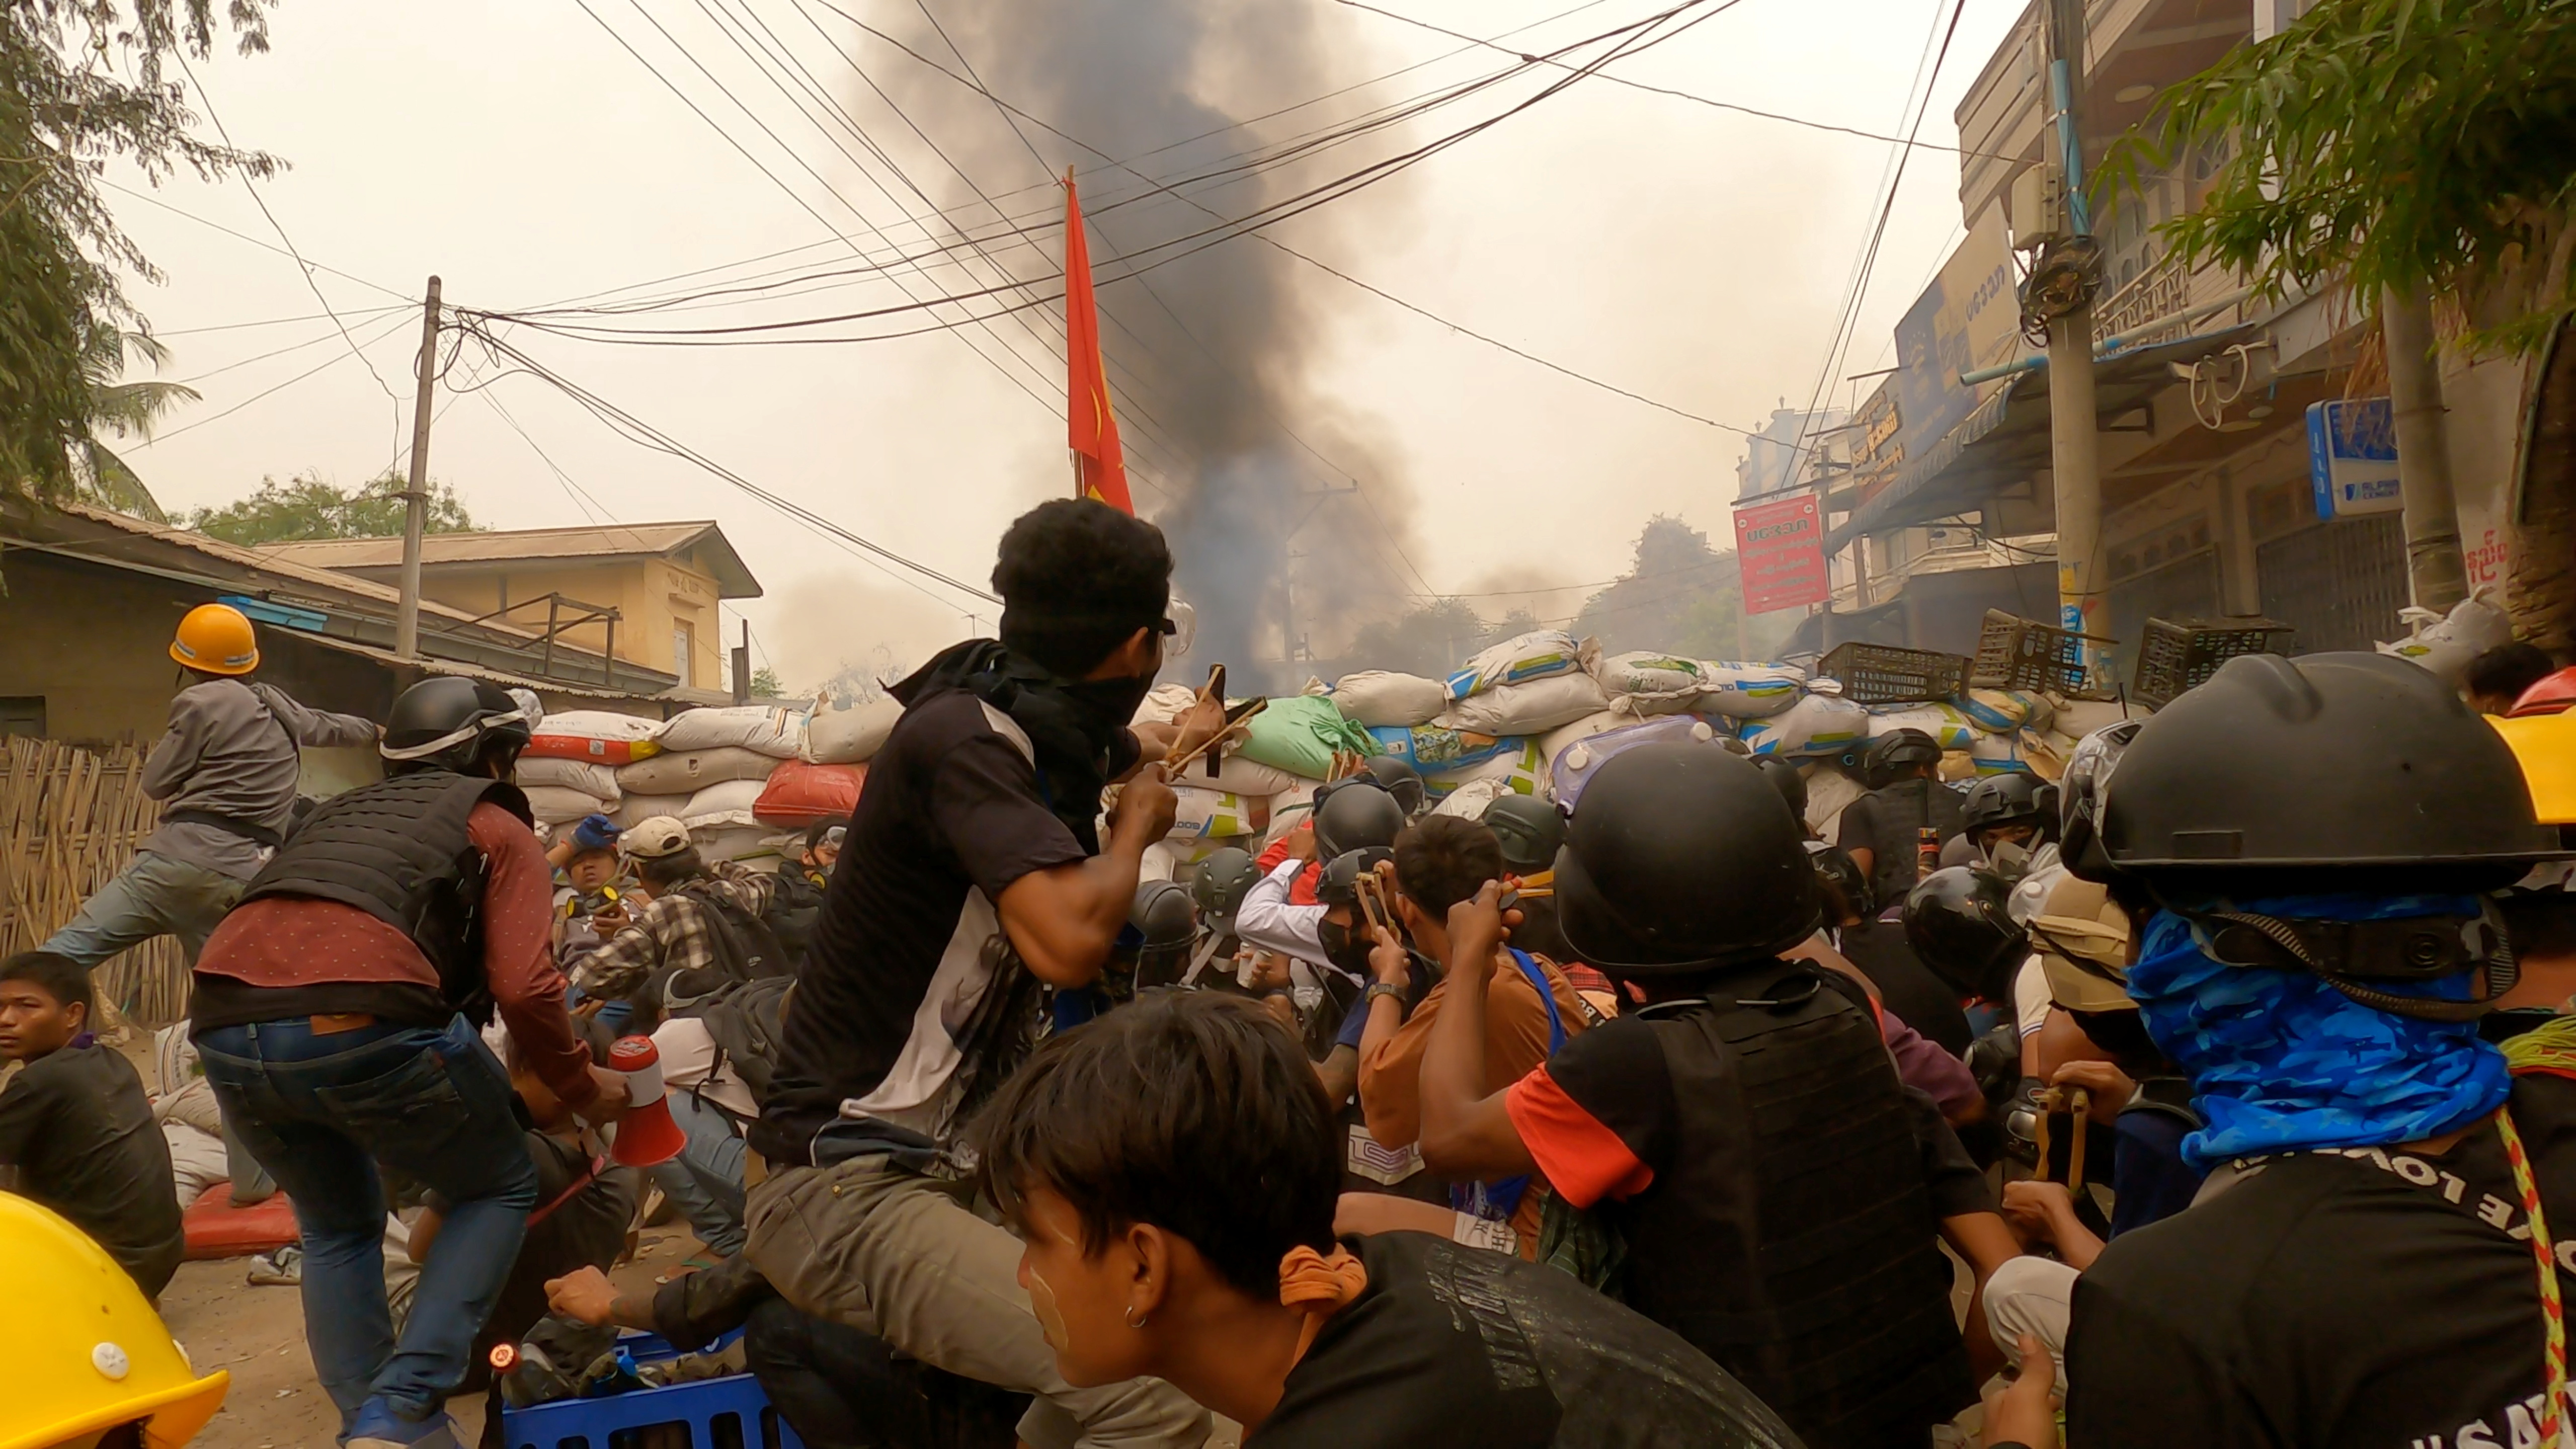 Protesters use slingshots while taking cover behind a barricade as smoke rises from burning debris during ongoing protests against the military coup, in Monywa, Sagaing region, Myanmar March 29, 2021 in this still image from video obtained by REUTERS 